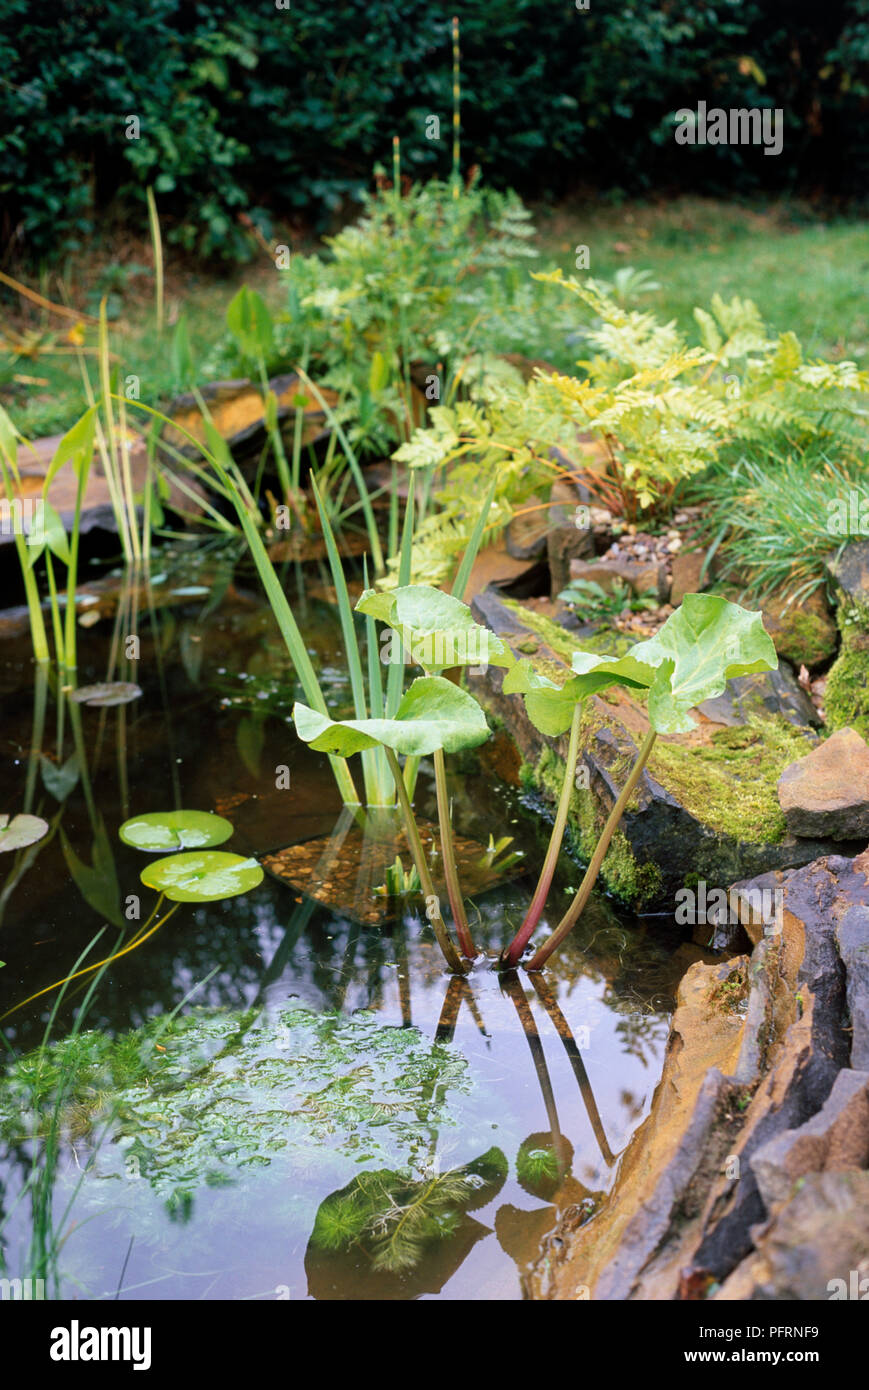 Aquatic plants growing in pond with stone slab border Stock Photo